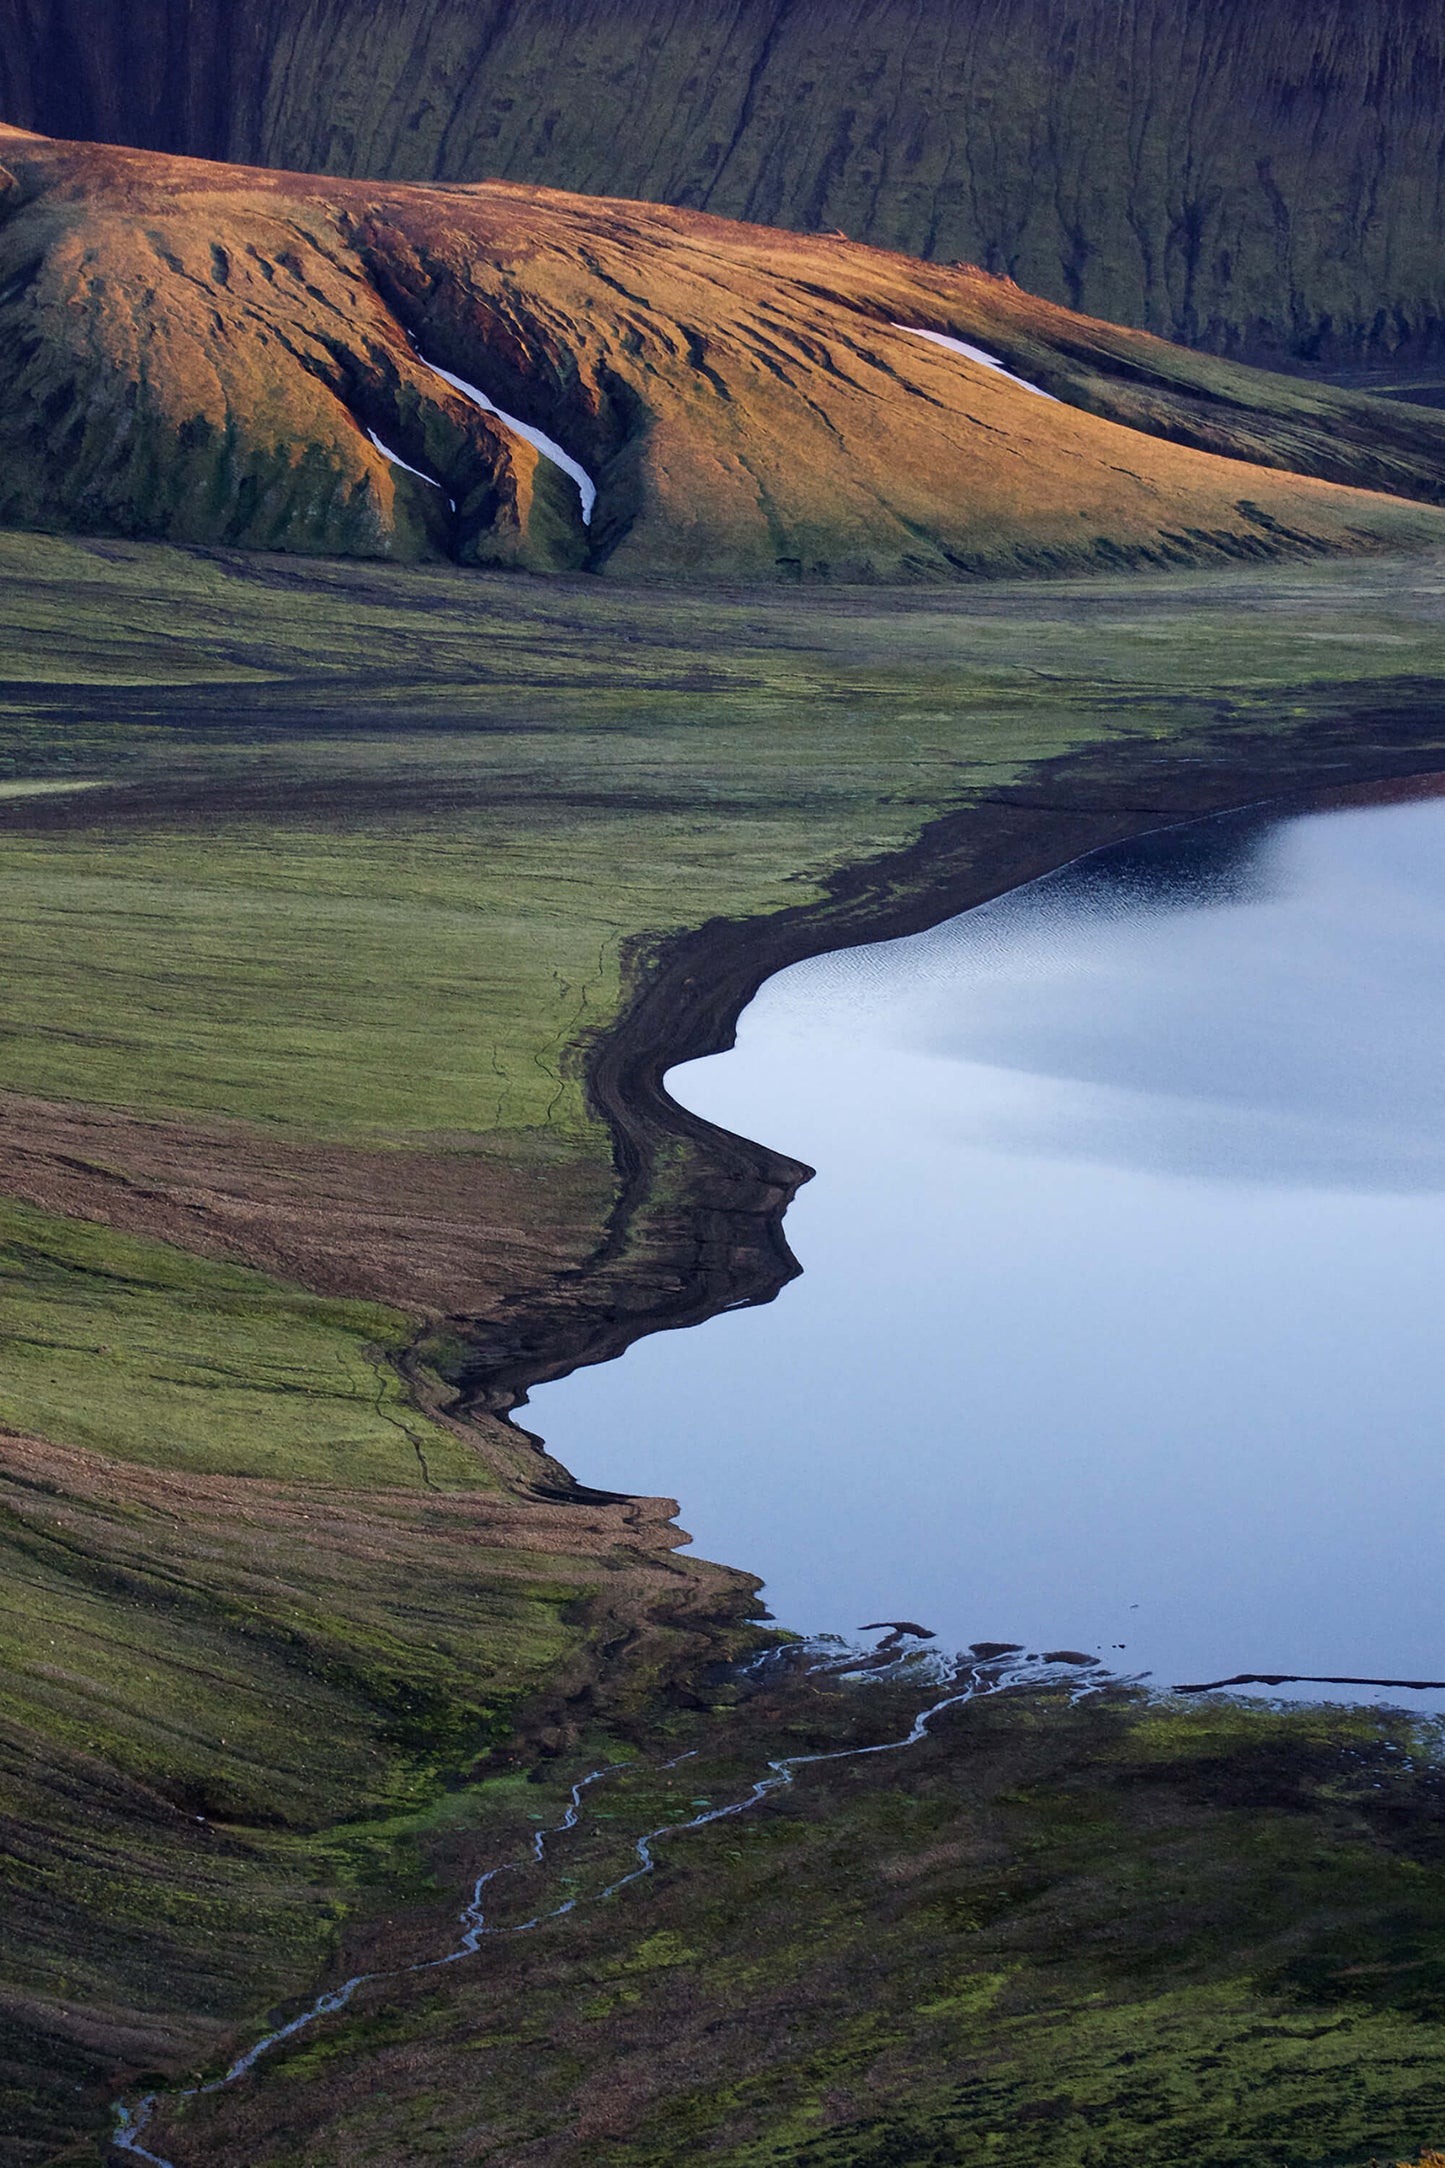 Edge of a lake in the highlands of Iceland